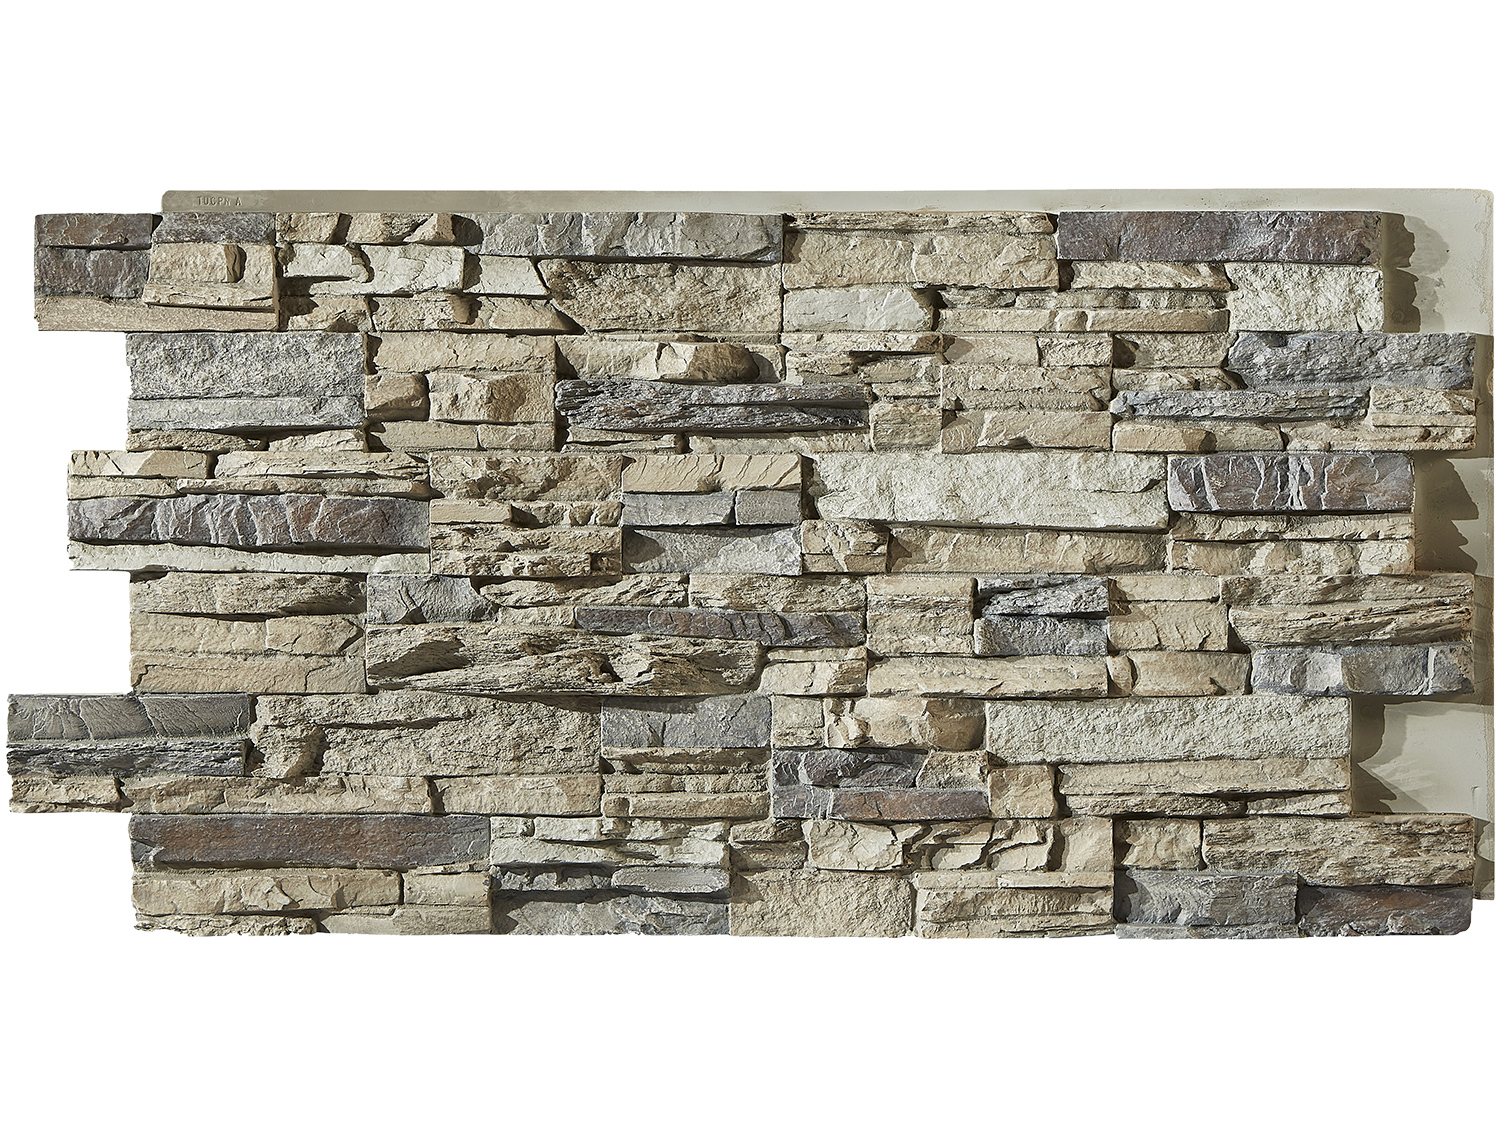 Does the Colorado Dry Stack stone have available corners?